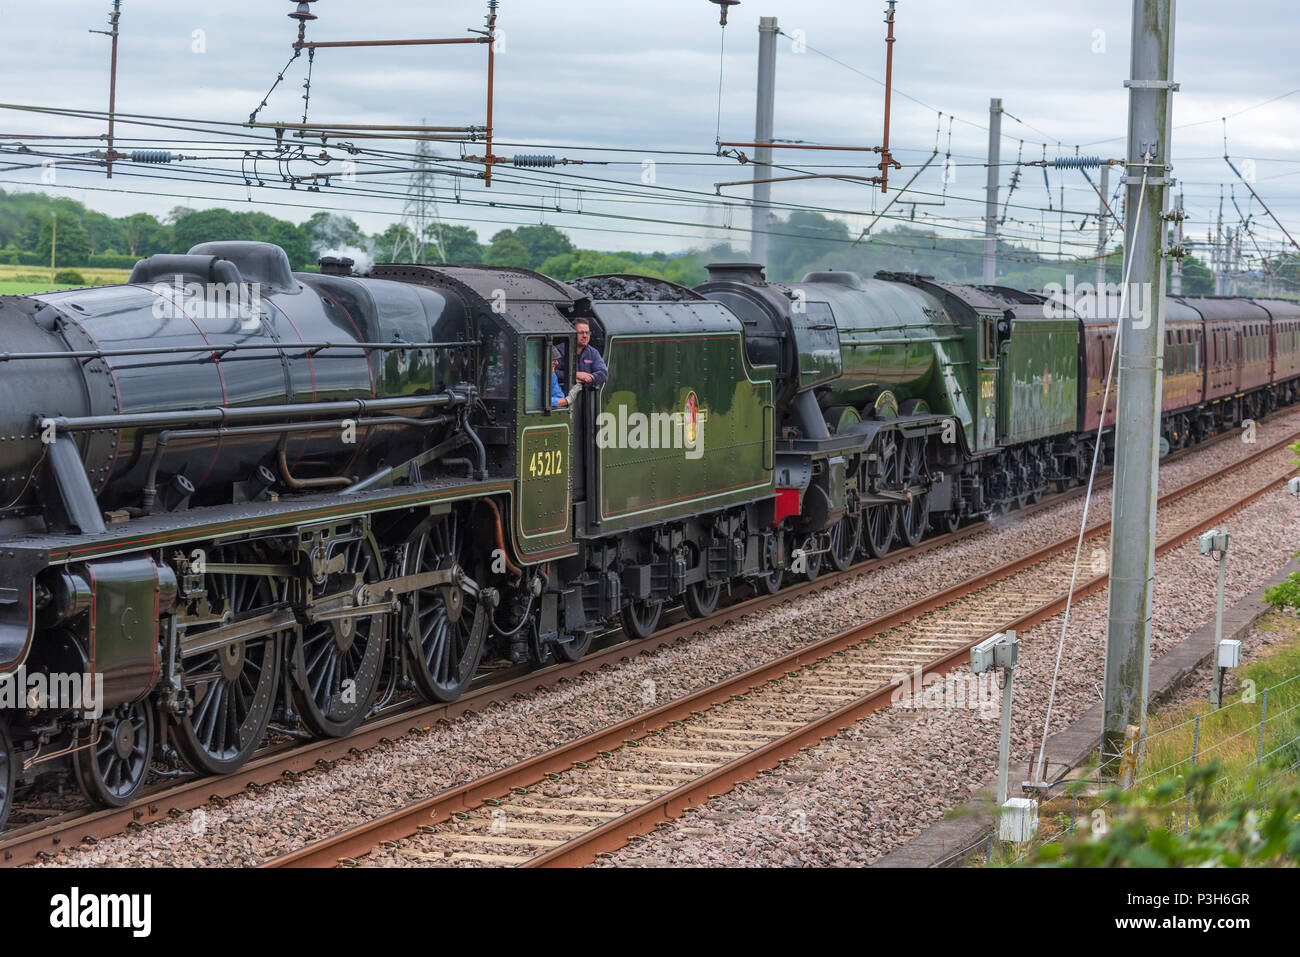 Winwick Cheshire United Kingdom.  18th June 2018. The world’s most famous steam locomotive, LNER A3 Class 4-6-2 no 60103 Flying Scotsman seen crossing Winwick Junction on the West Coast Main Line behind Stanier Black Five  LMS Class 5MT 4-6-0 no 45212 loco hauling day 1 of Steam Dreams railtour The Lakes Express. Credit: John Davidson Photos/Alamy Live News Stock Photo